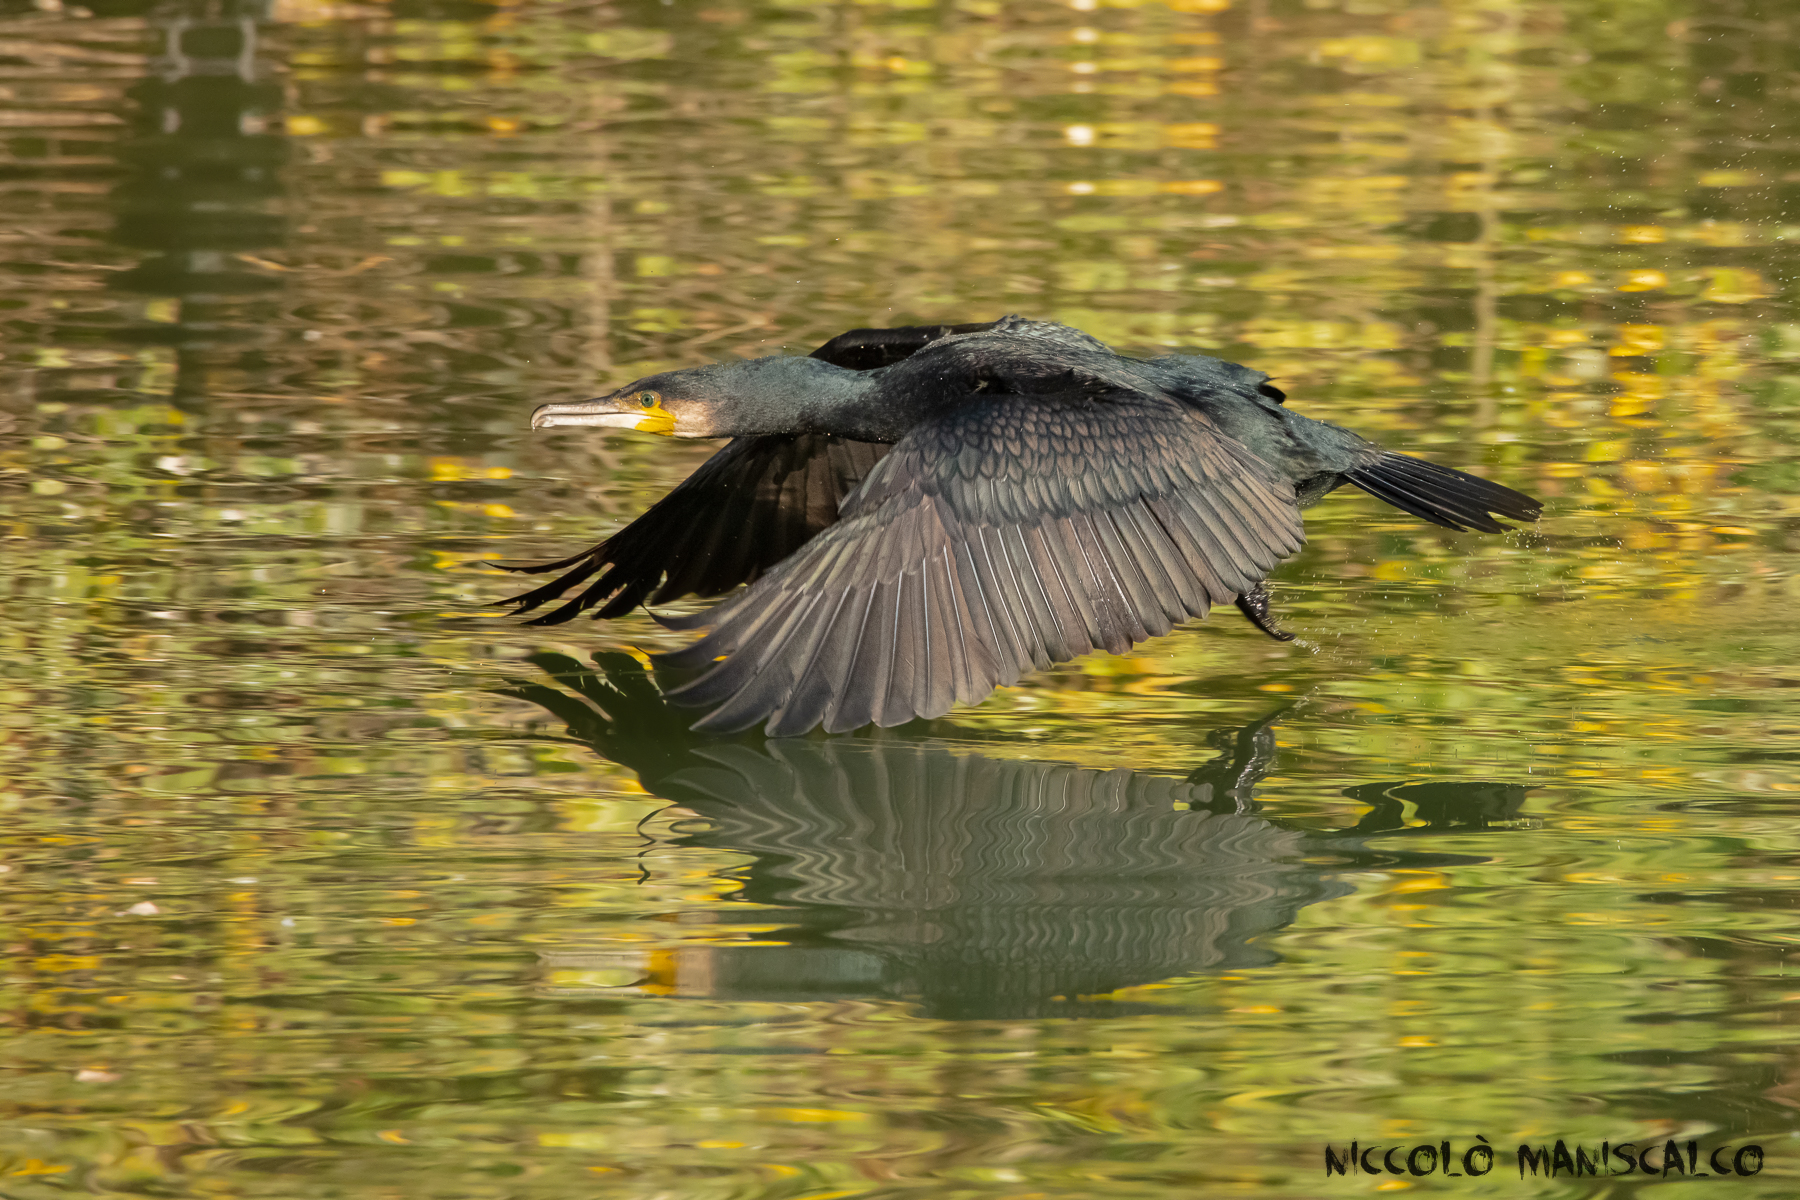 Autumn background for the Cormorant...